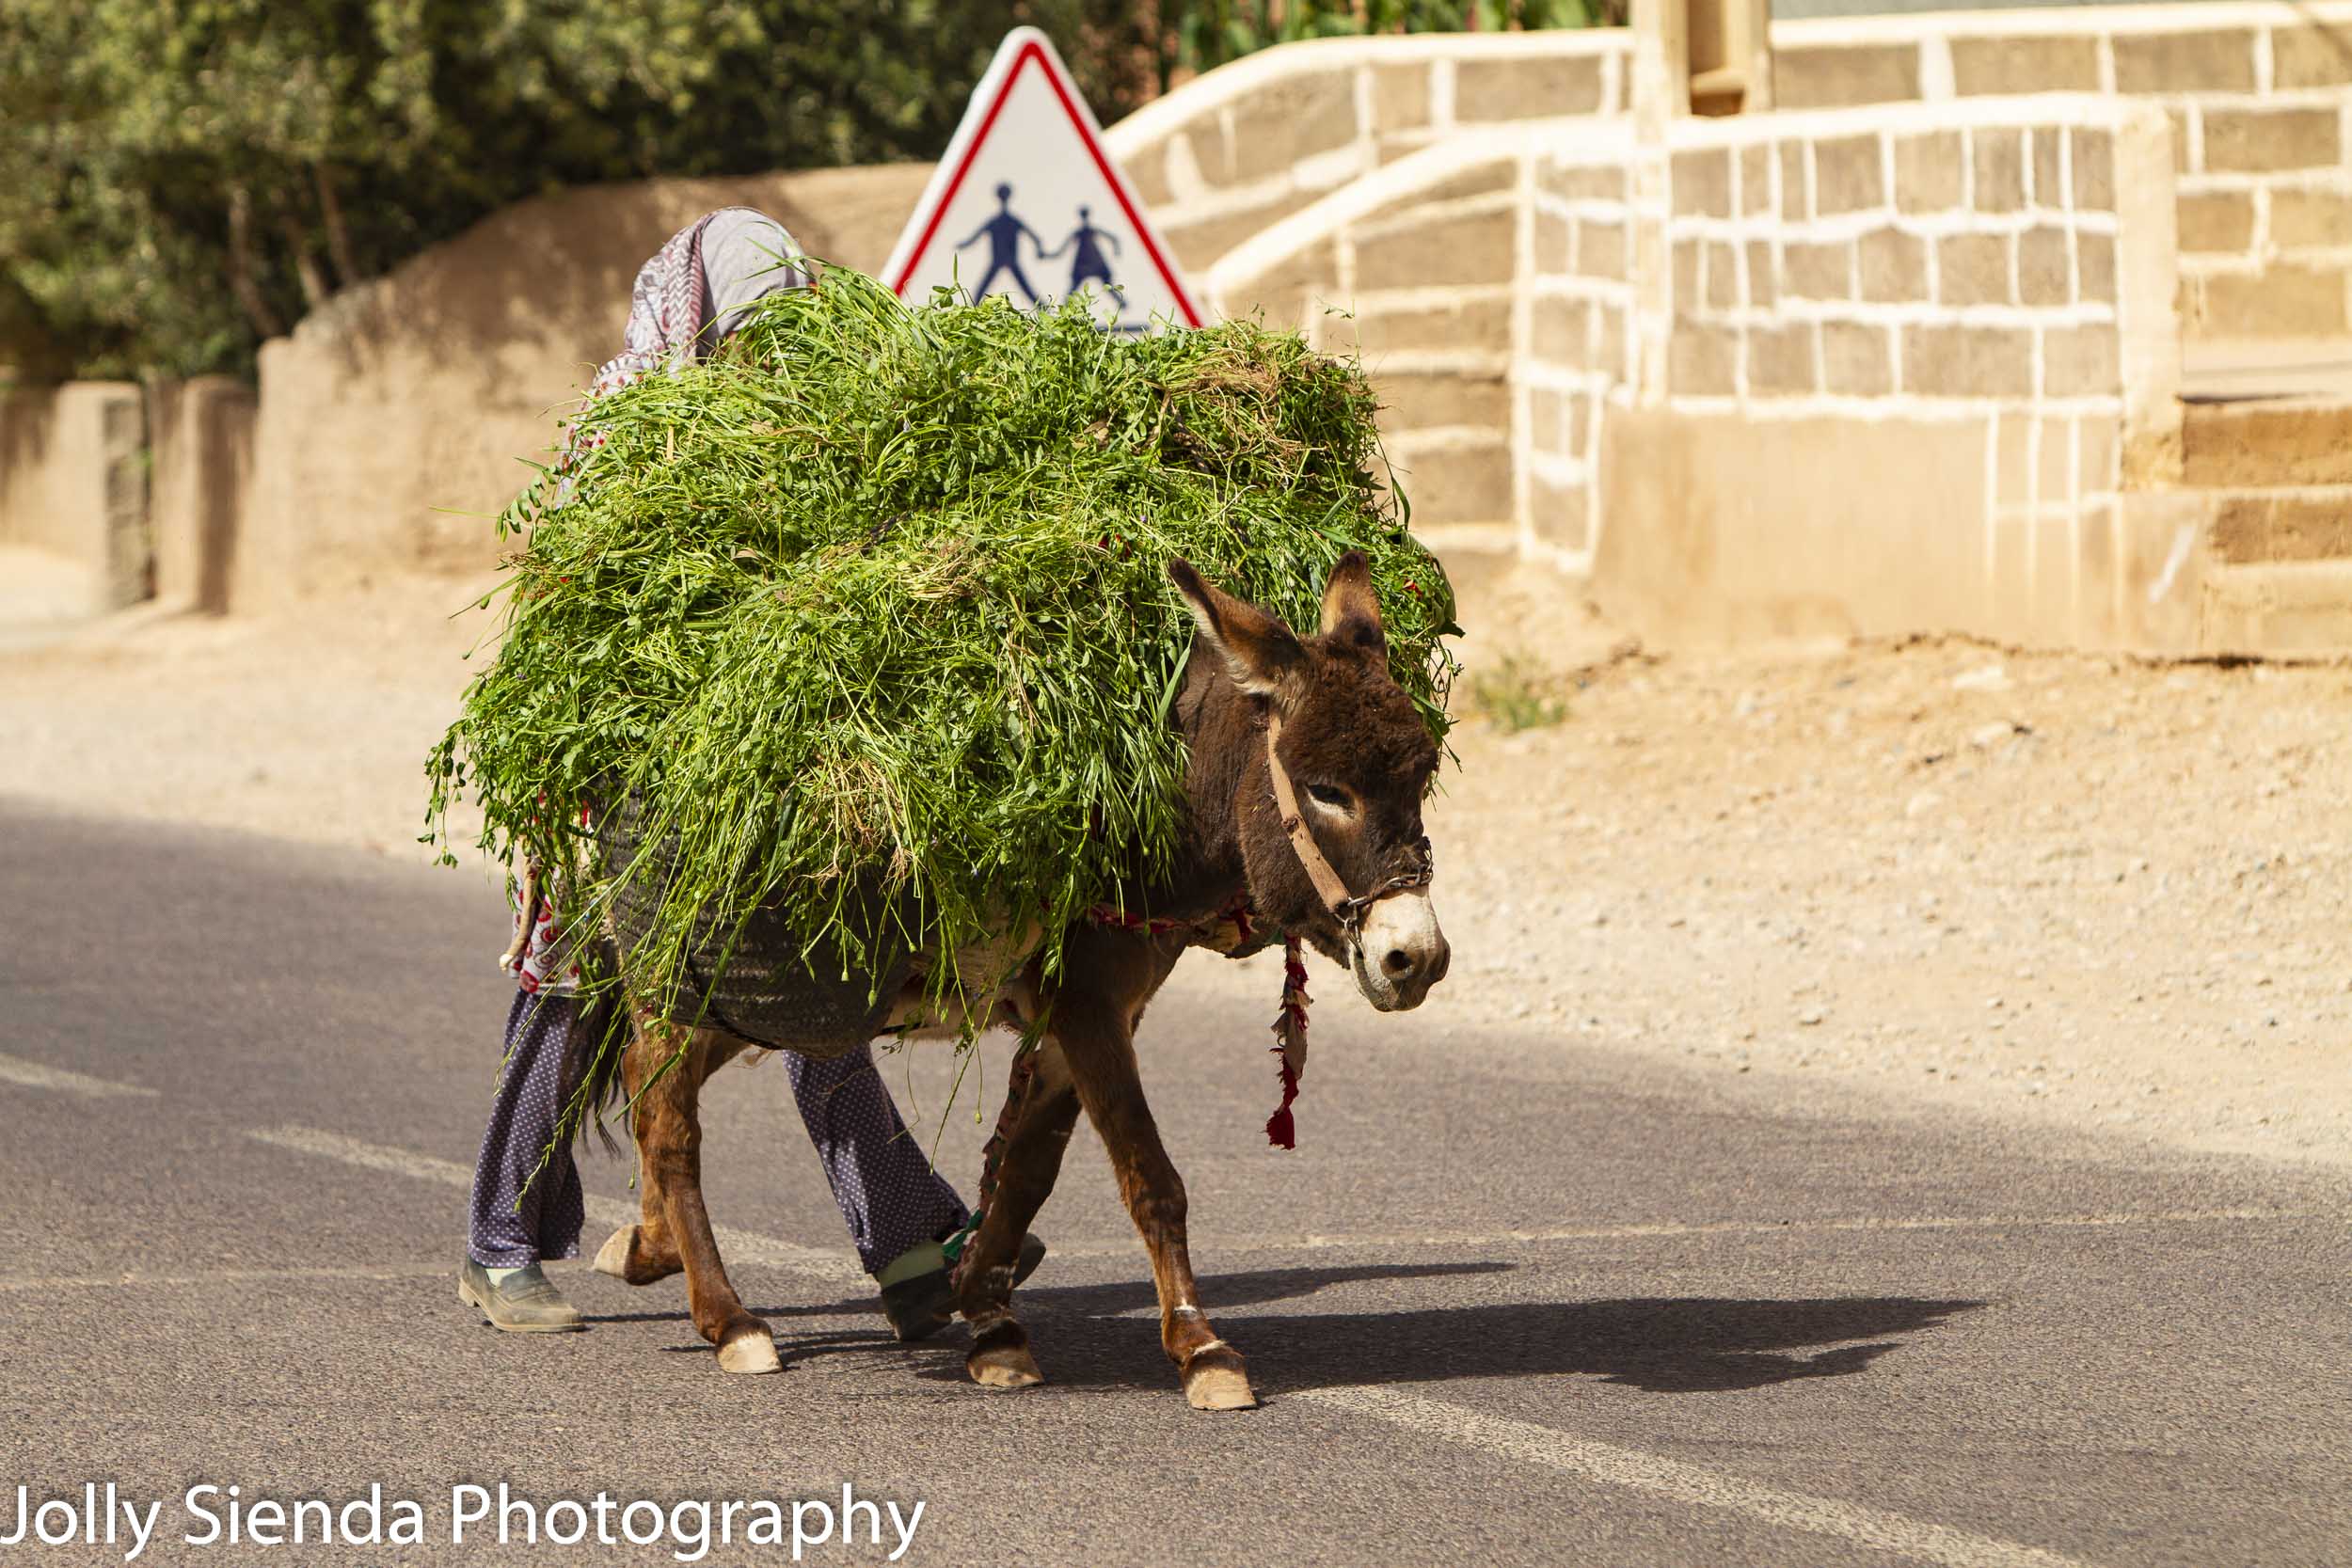 Donkey carries grasses led by a shy girl